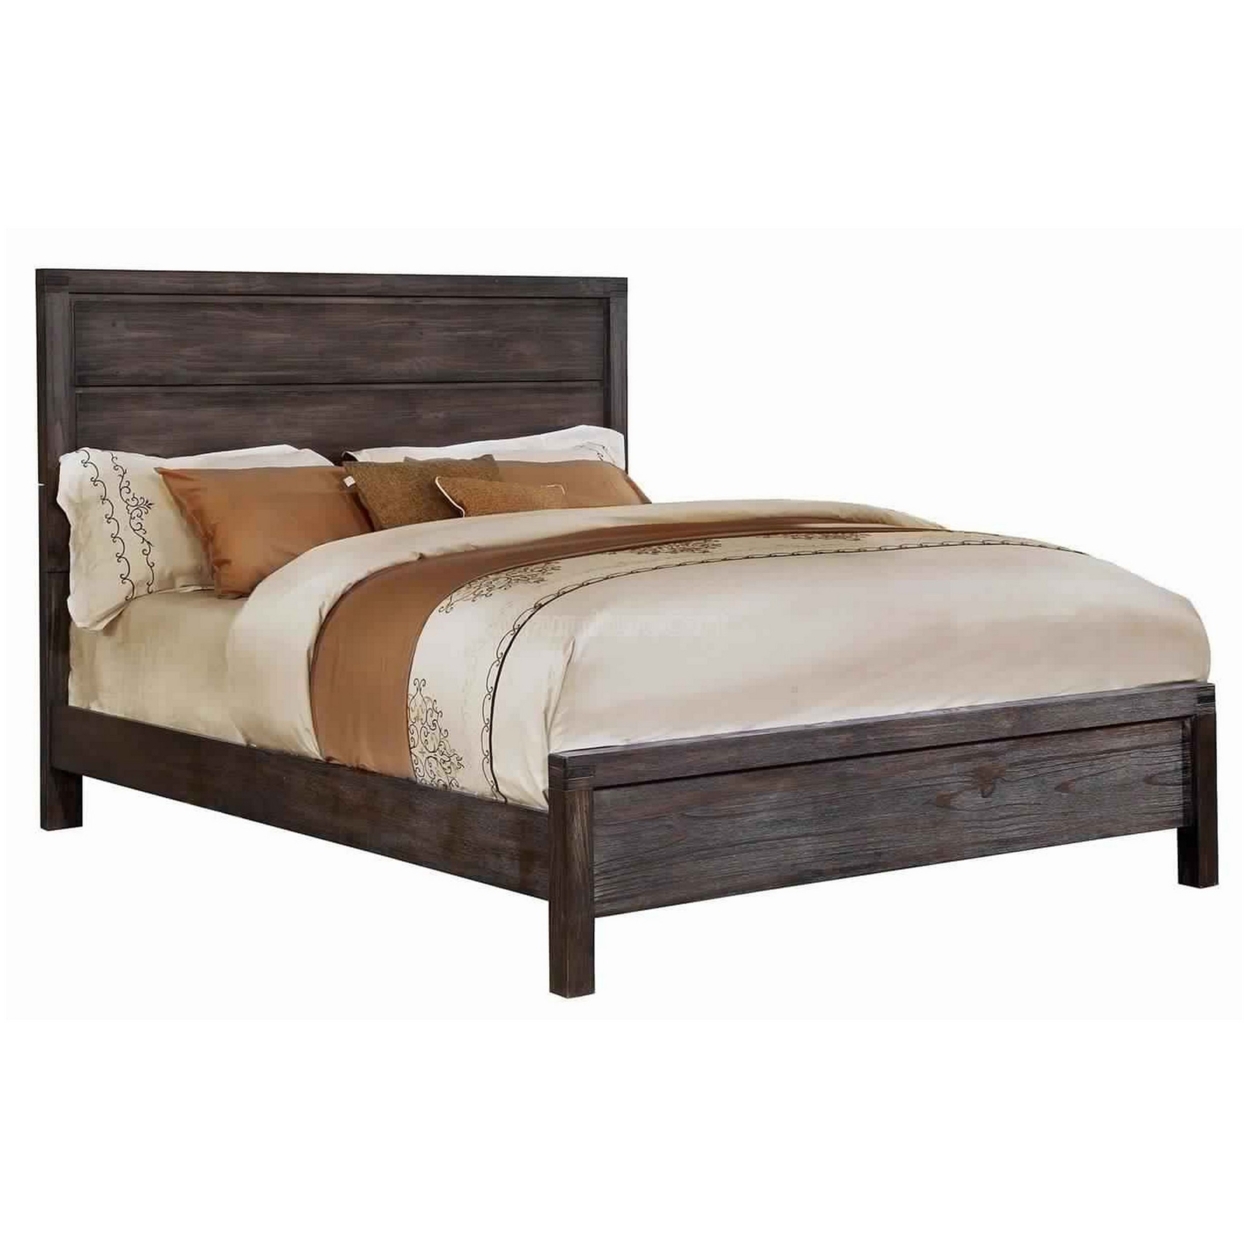 Wooden Queen Size Bed With Panel Headboard, Brown And Gray- Saltoro Sherpi